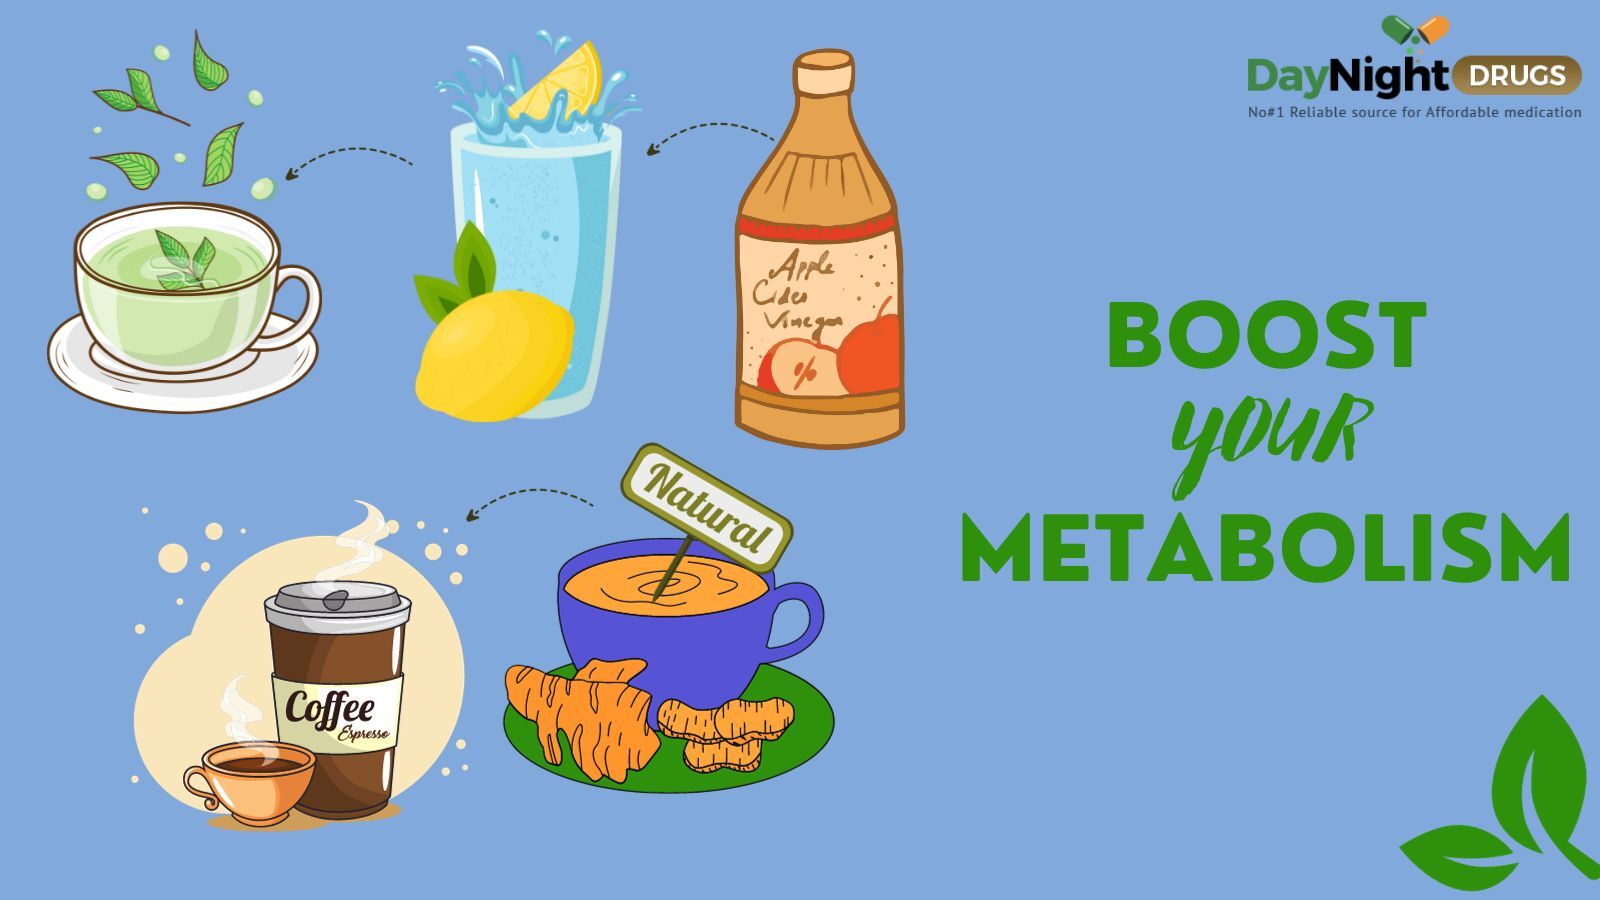 5 home made drinks that help to lose excess weight by boosting metabolosm.